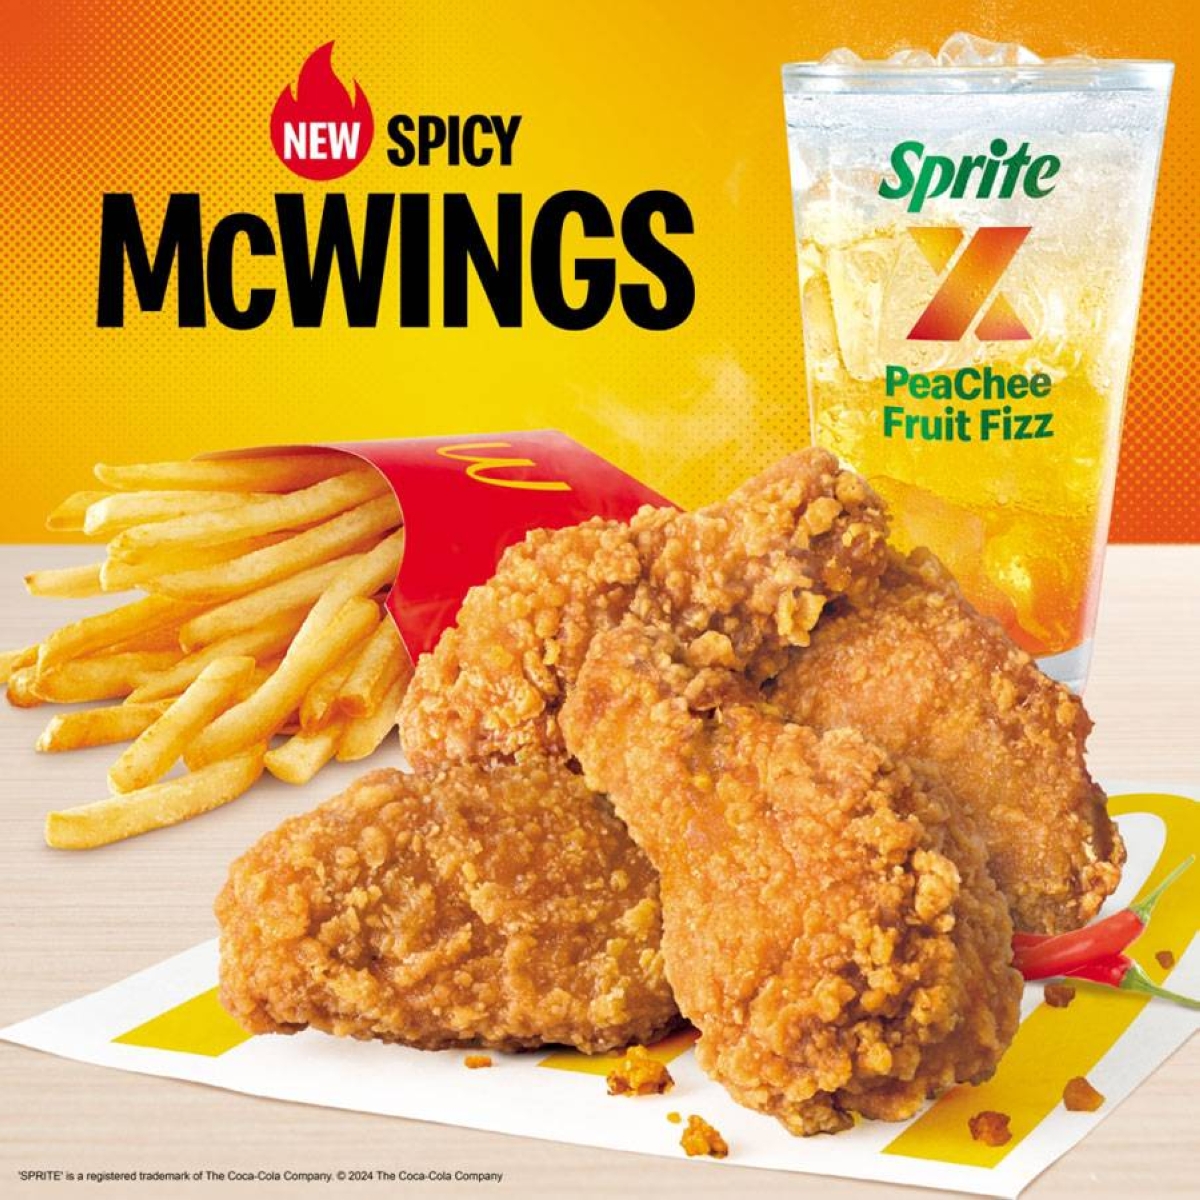 mcdonald's offers limited new spicy mcwings